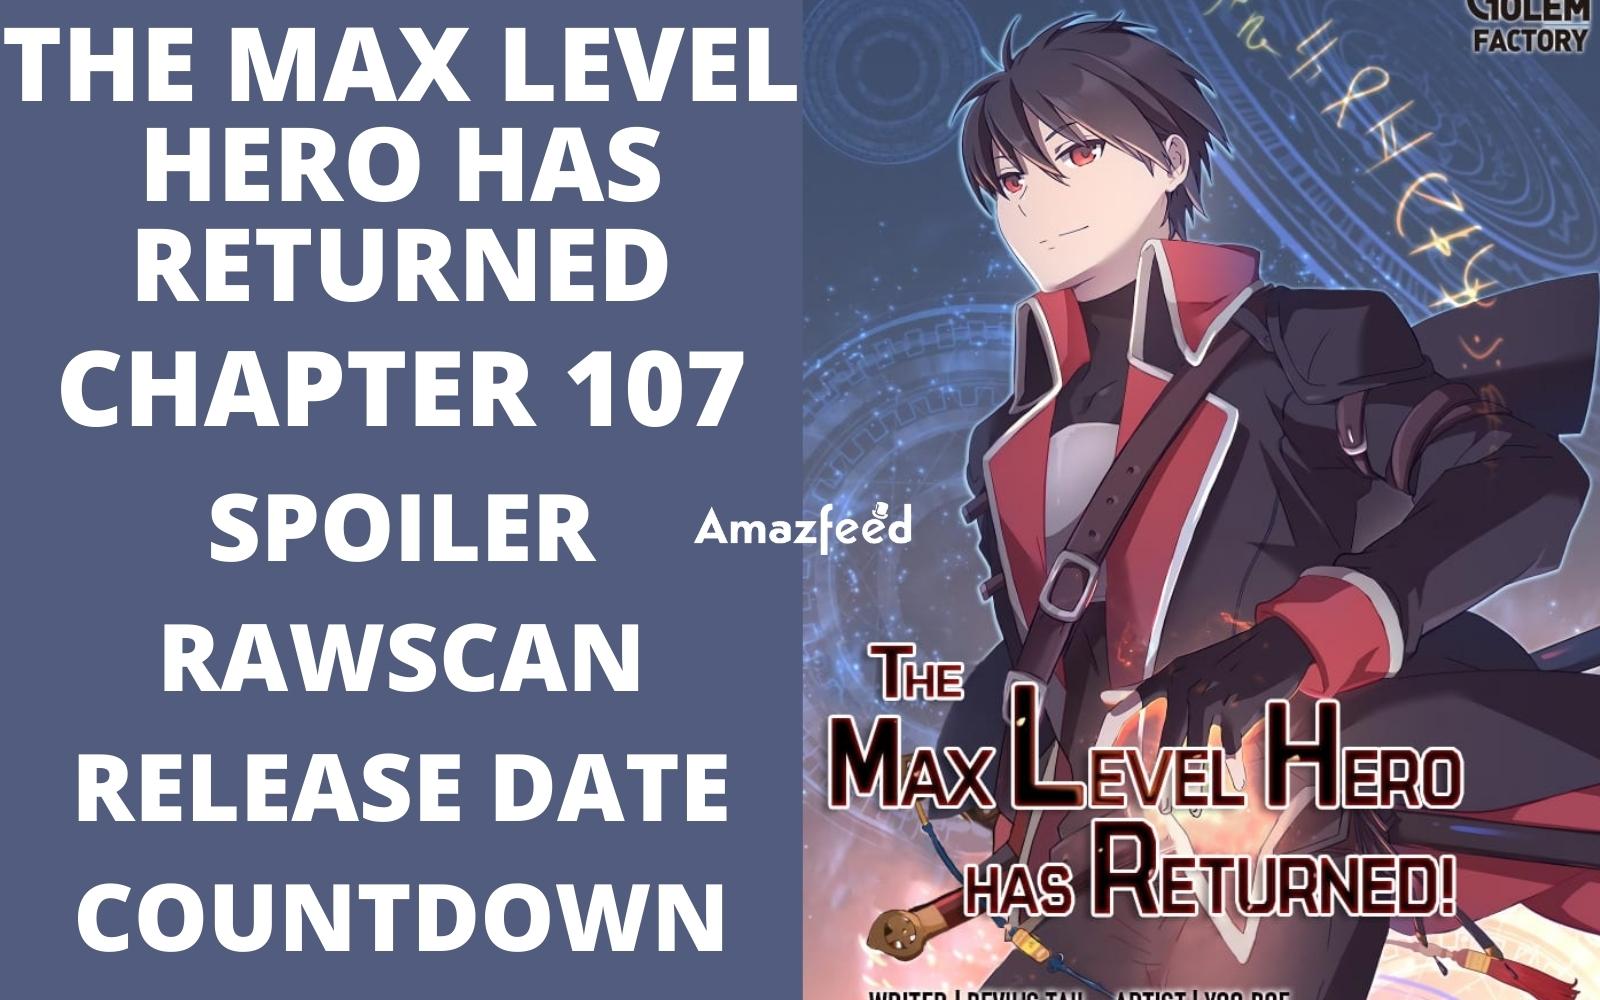 The Max Level Hero Has Returned Chapter 107 Spoiler, Release Date, Raw Scan, Countdown, Color Page